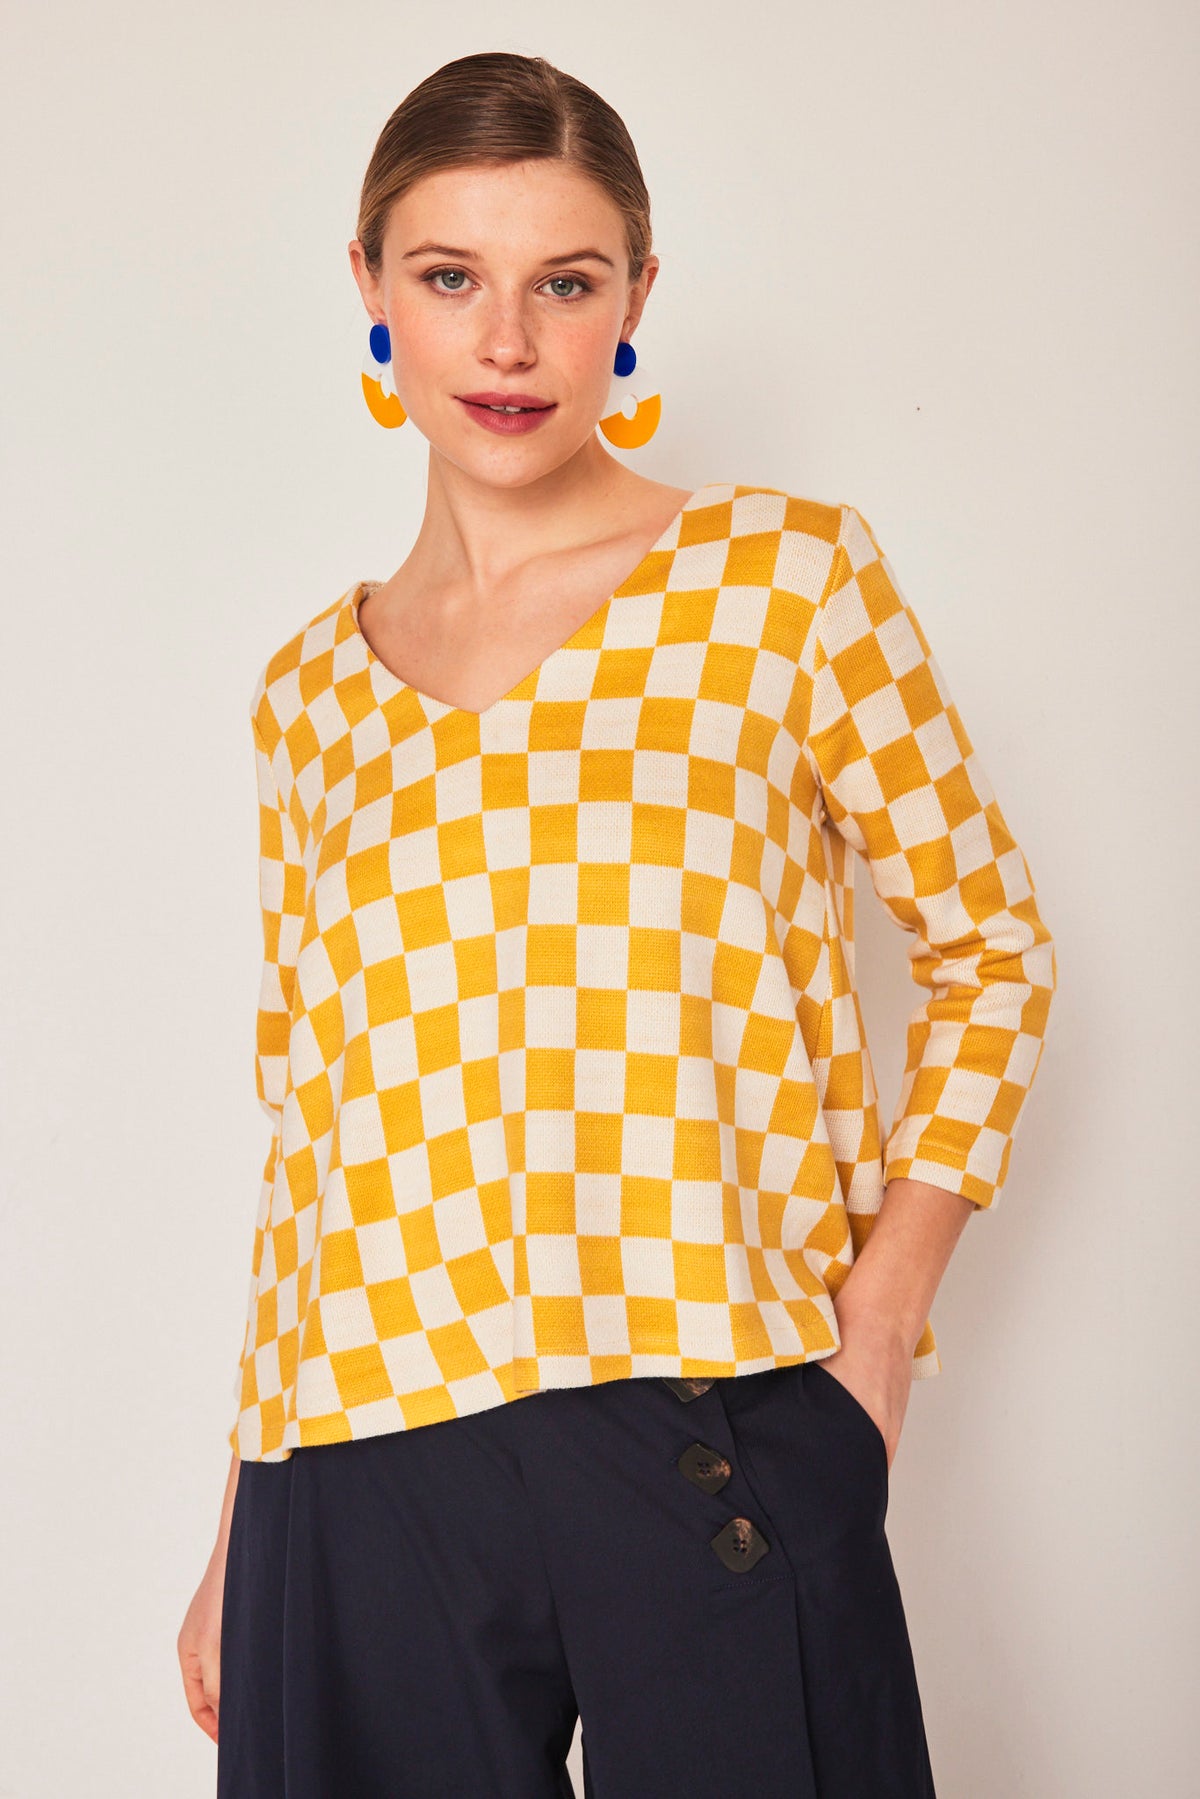 YELLOW PARROT STITCH top